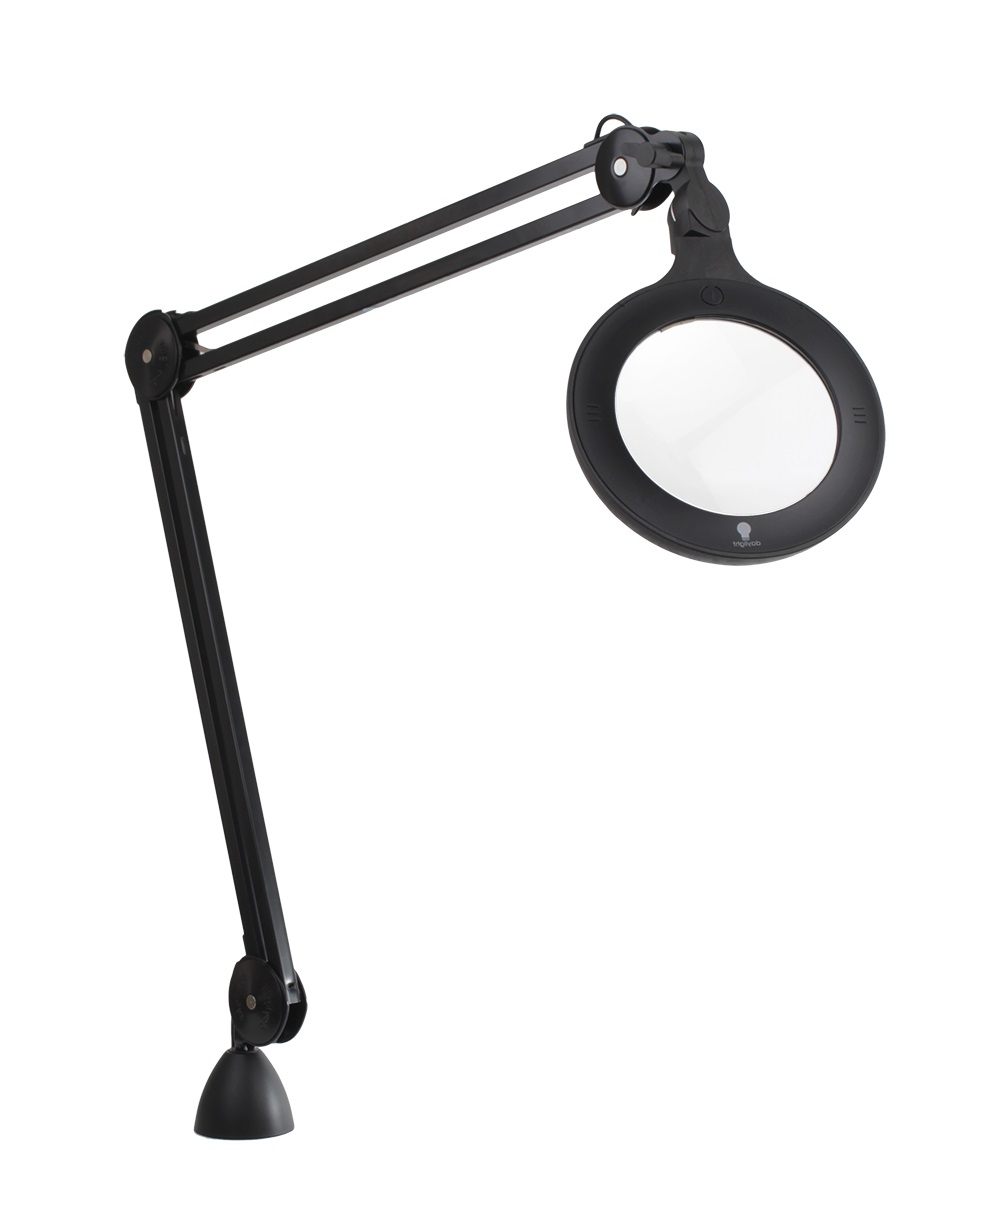 ESD Magnifier Omega 5 ESD Magnifying Lamp ESD 3 Diopter Lens 8 Watt LED Lighting ESD Products Daylight